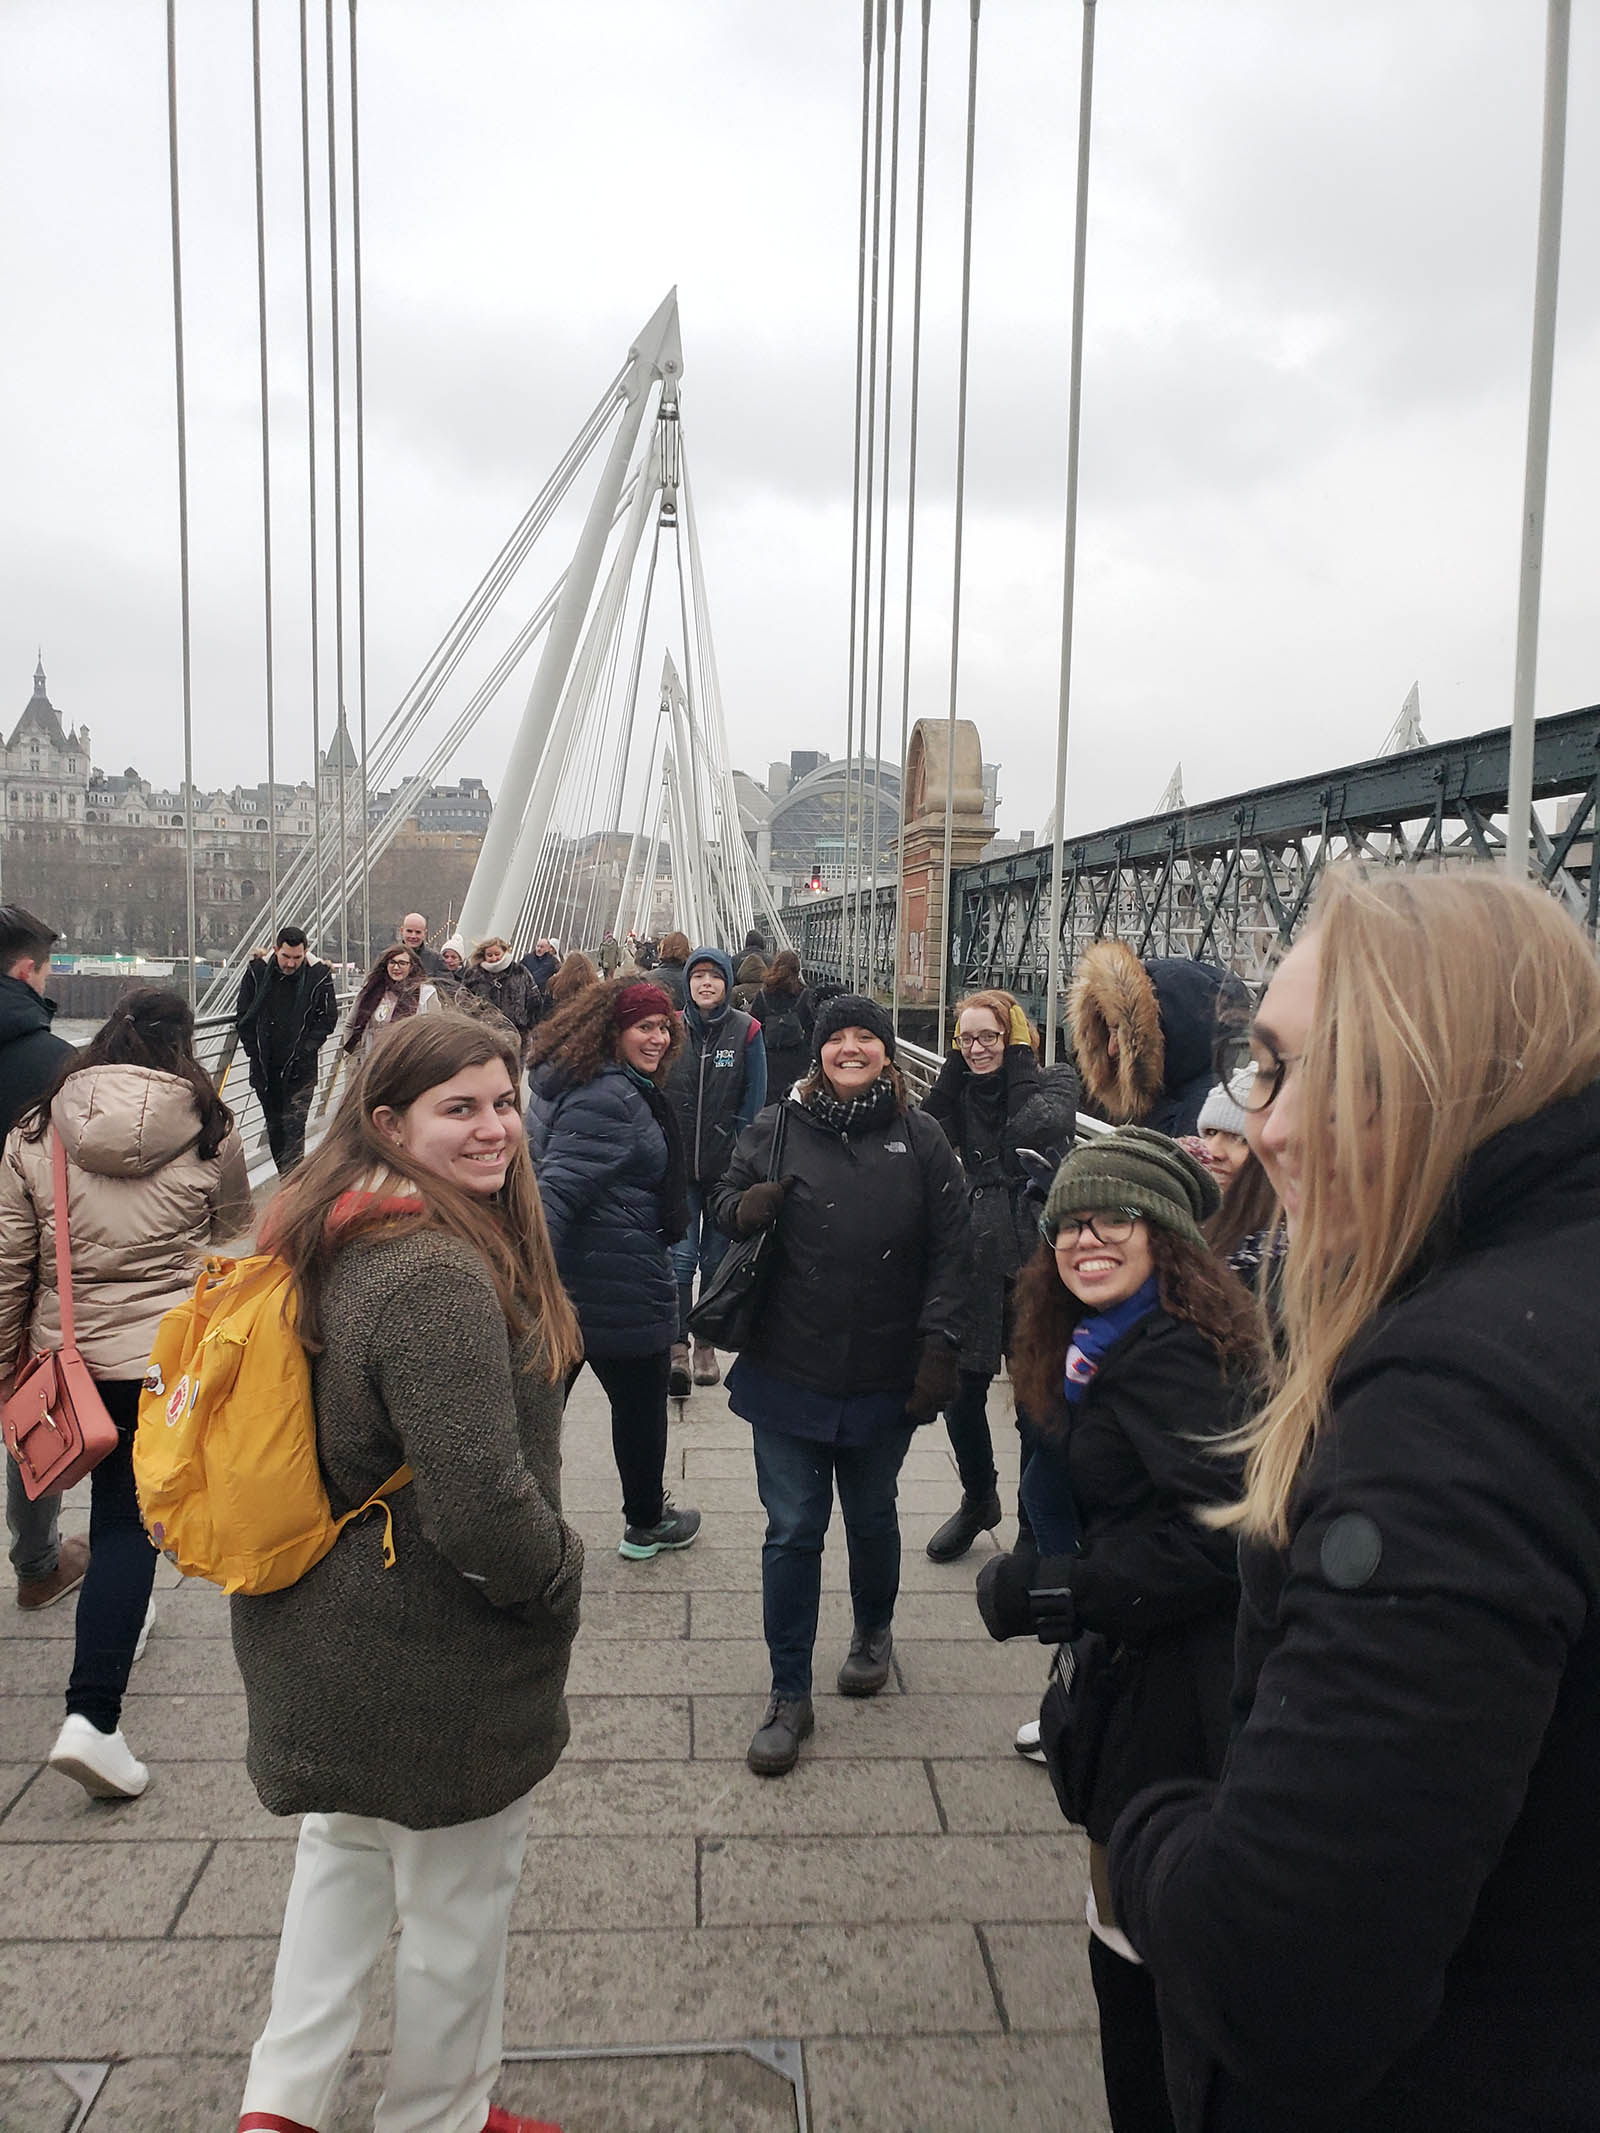 Photos from the Career Center's 2018 Study Abroad Trip to London.